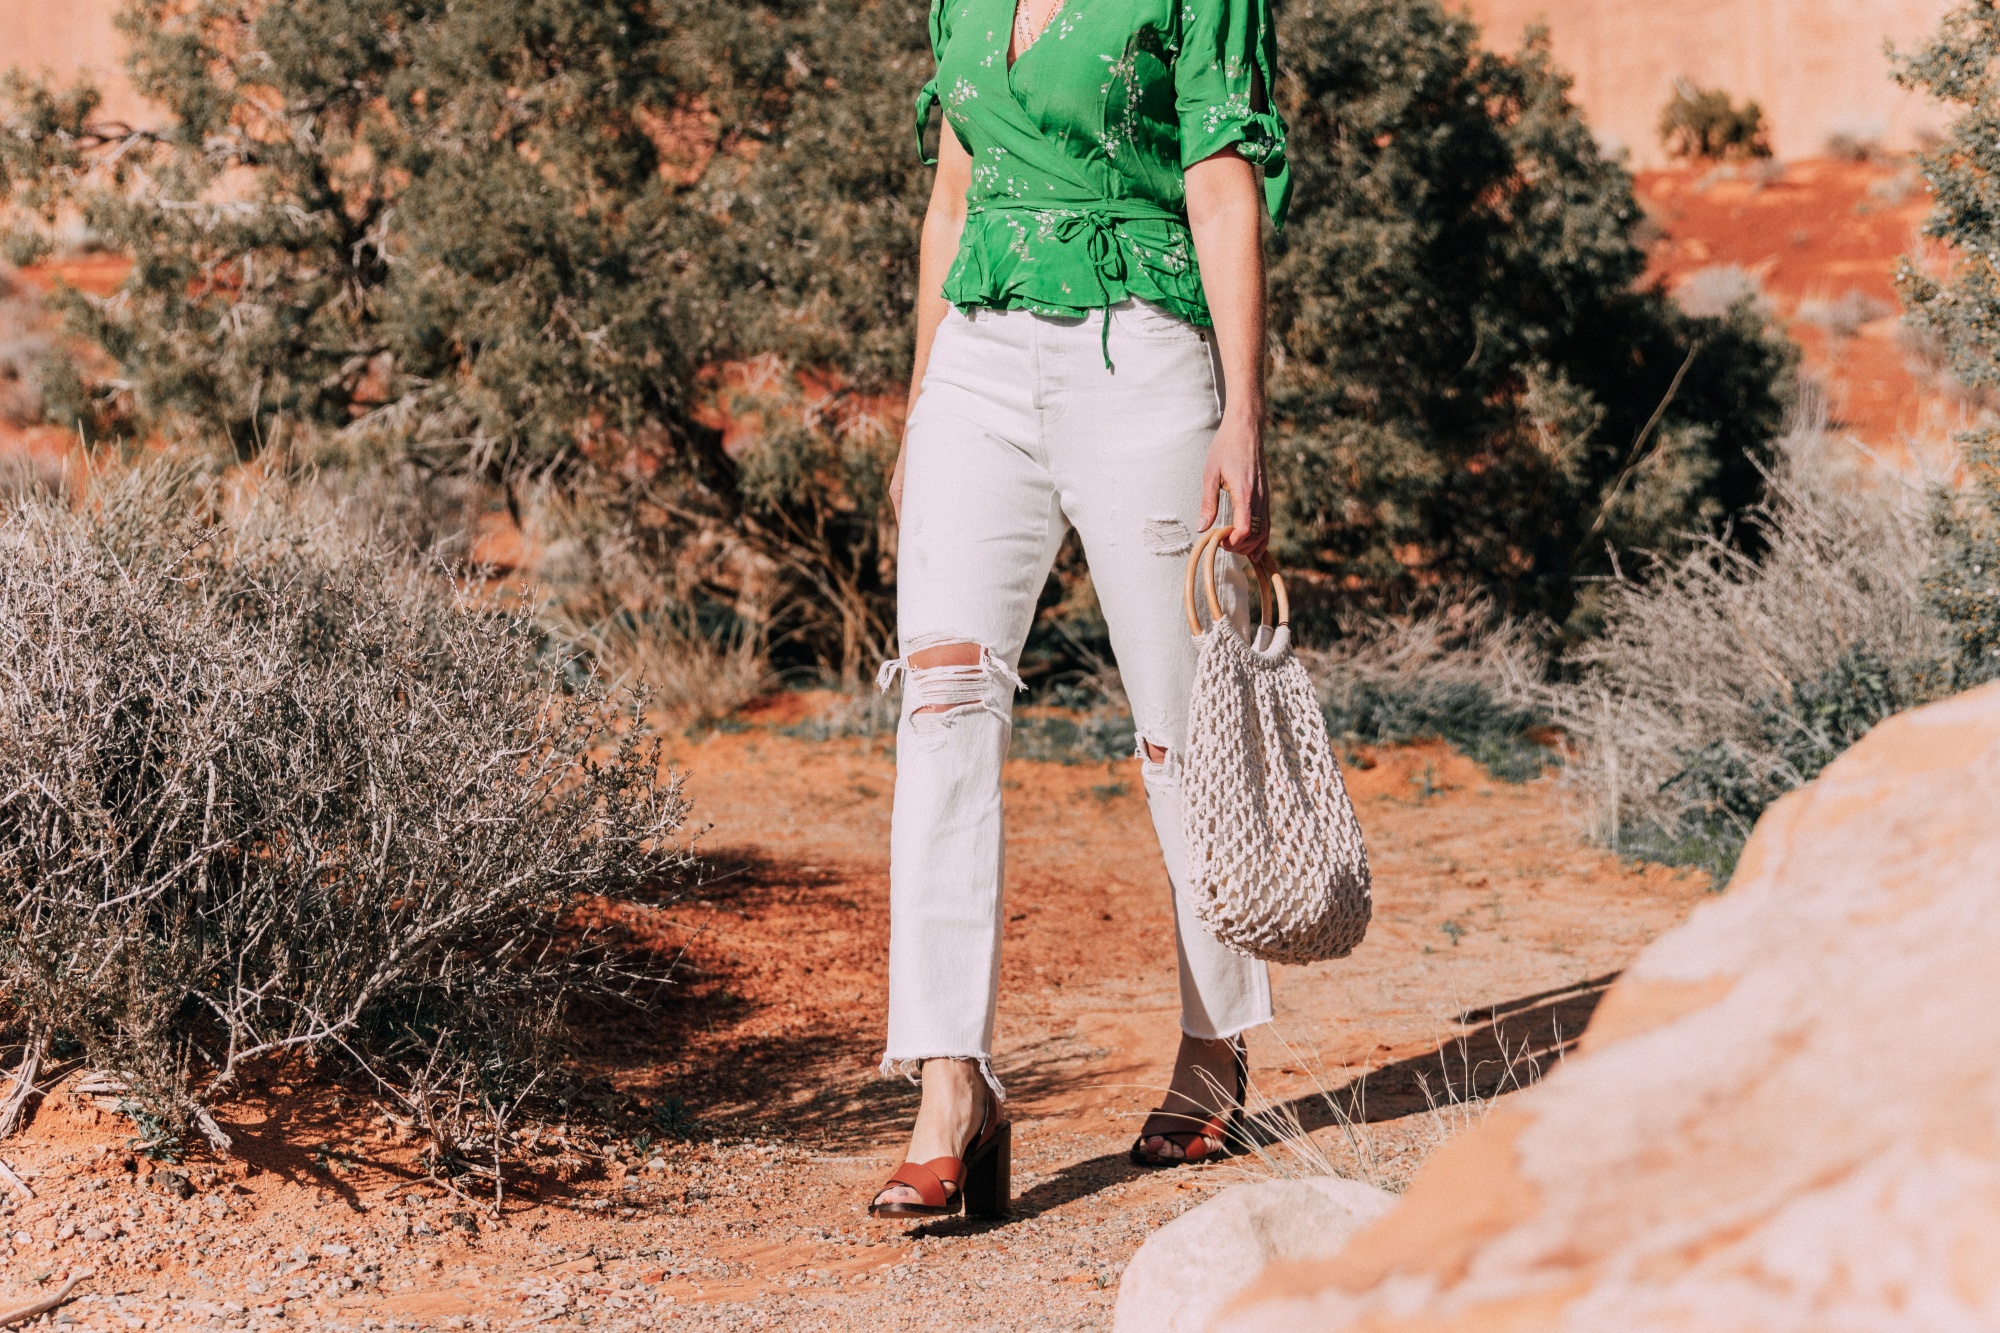 ECO-Friendly clothes featuring the pop-up shop, Good For The Globe, Fashion blogger Erin Busbee of BusbeeStyle.com wearing a green floral Faithfull The Brand top, Kayu rope bag, and Levi jeans from Bloomingdale's in Moab, Utah